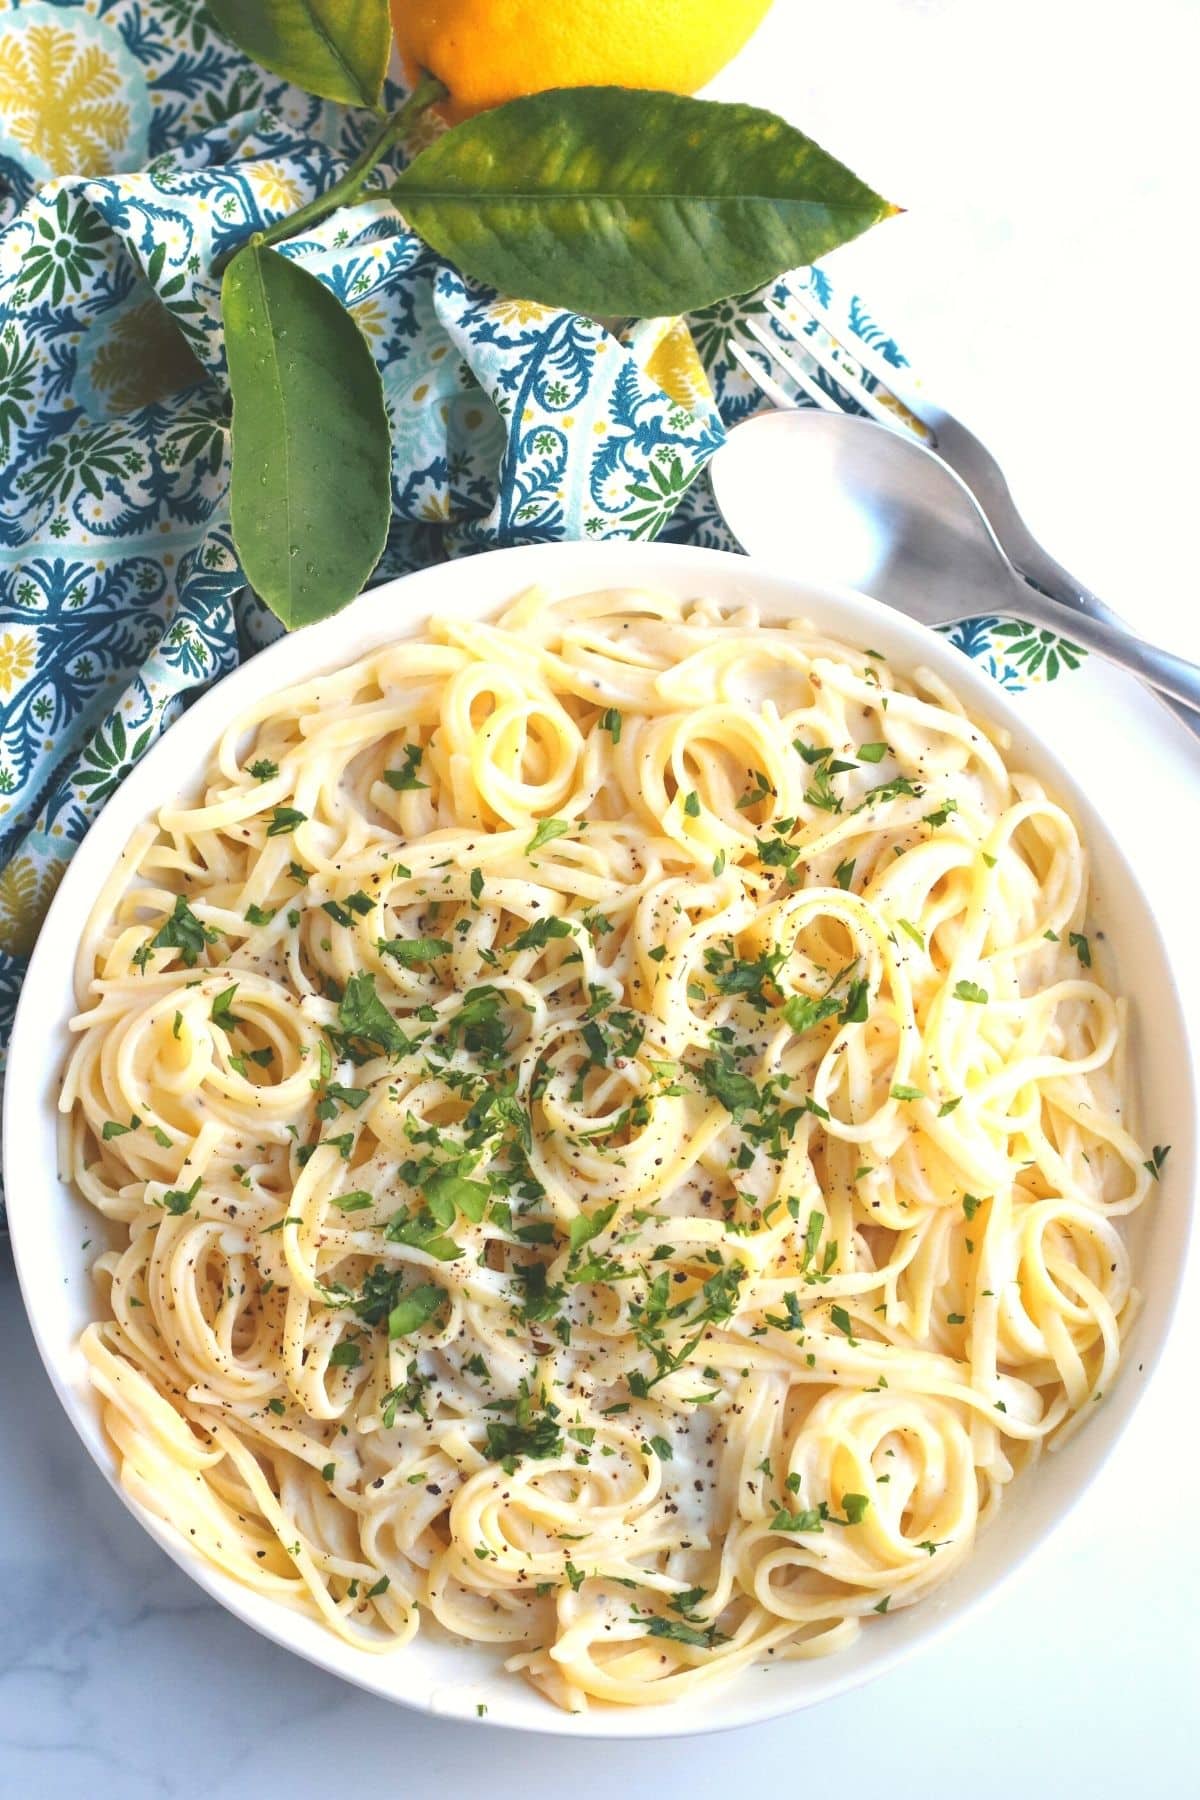 Bowl of pasta with a creamy sauce garnished with fresh herbs